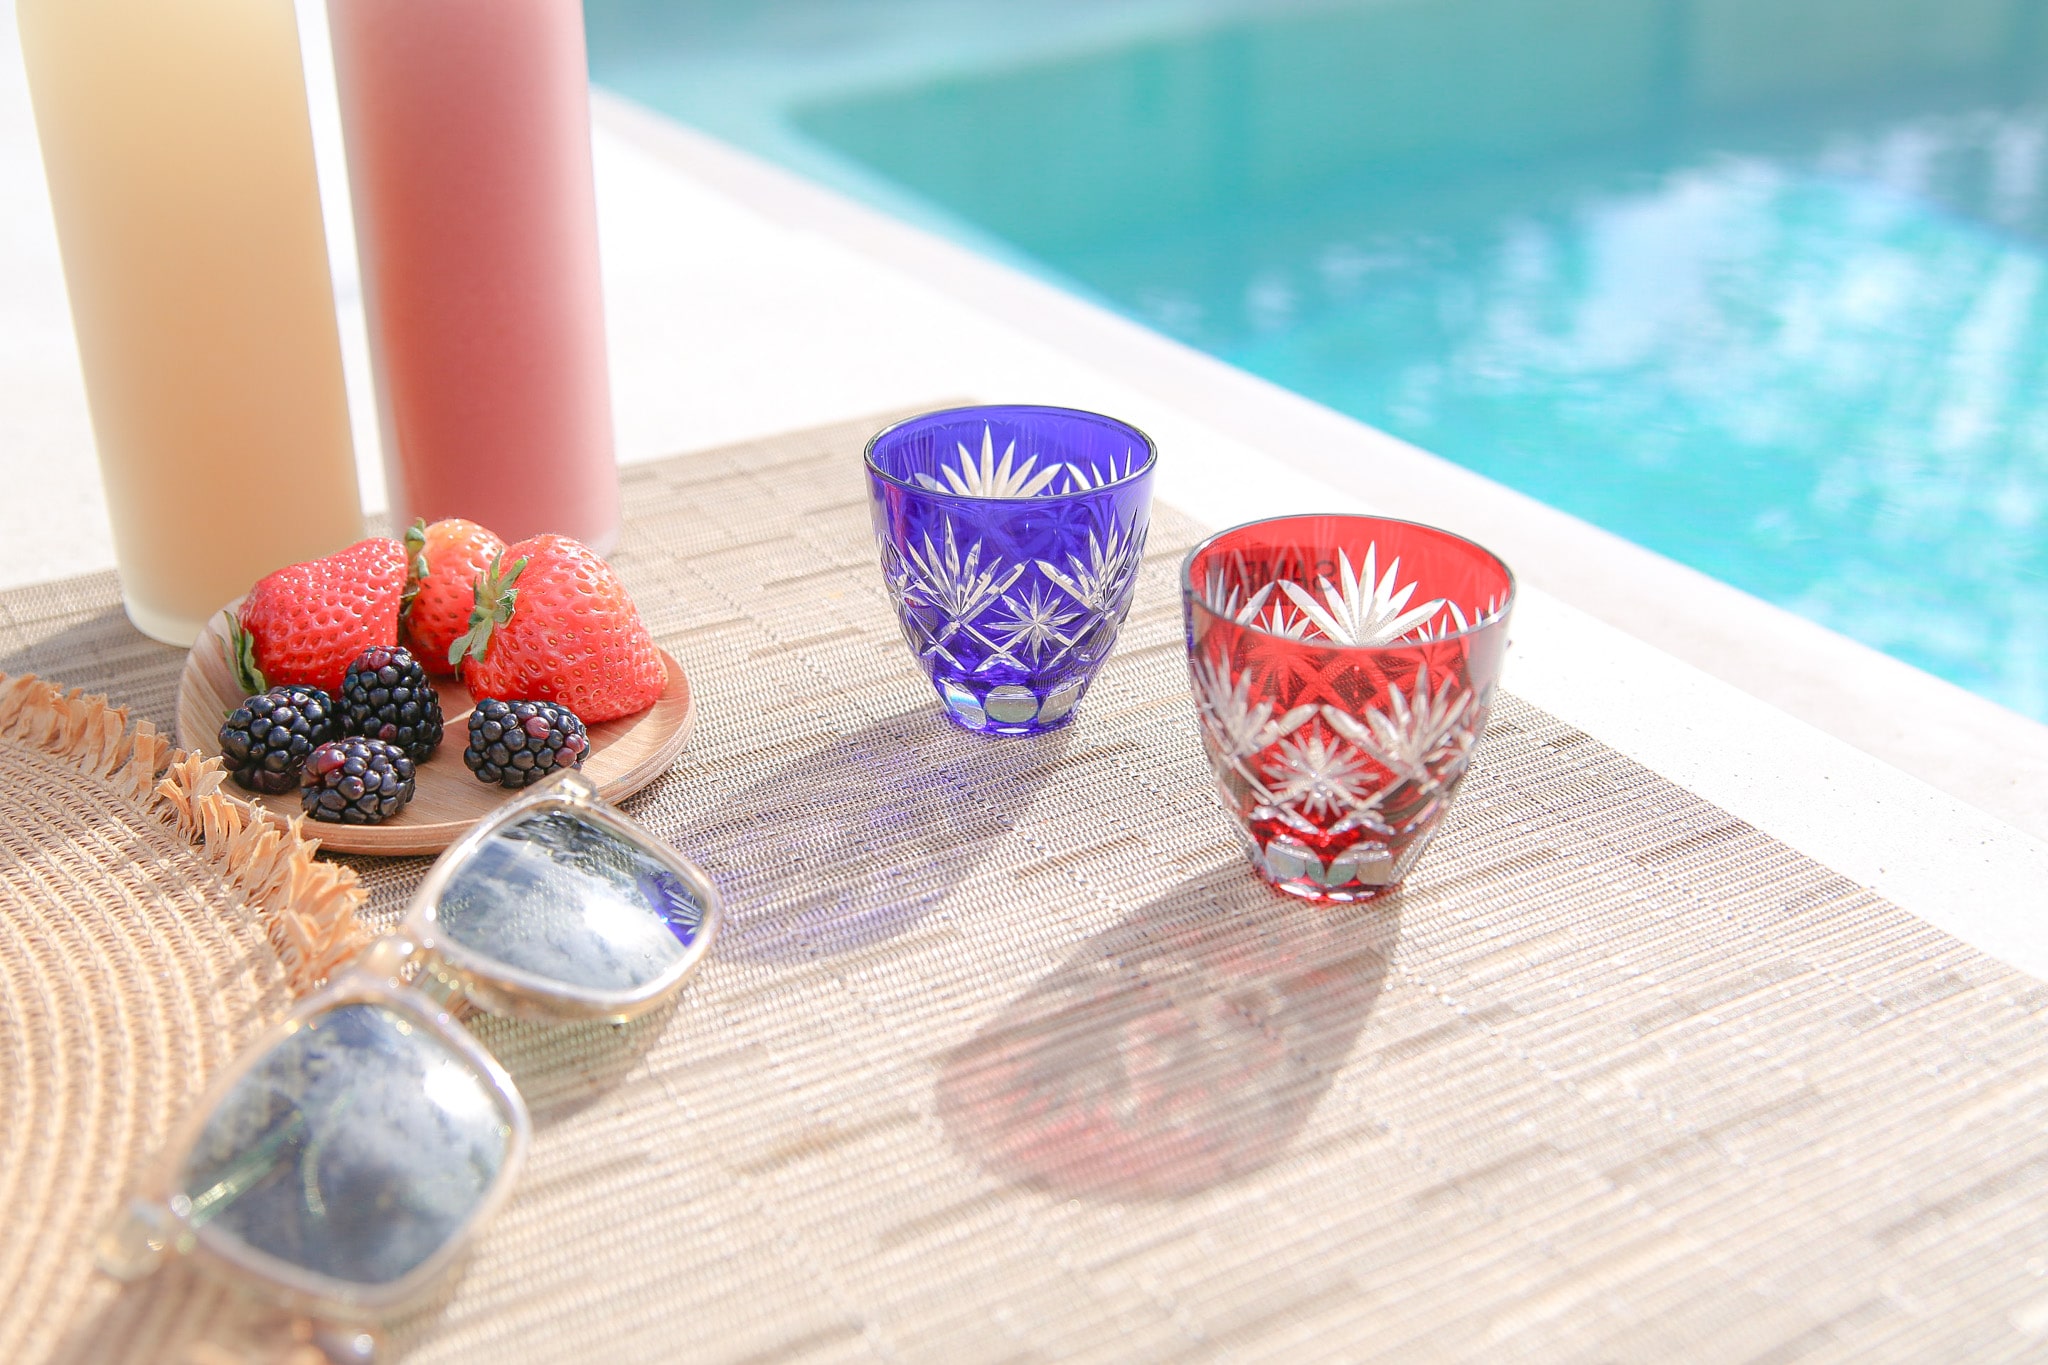 Edo glass by the pool